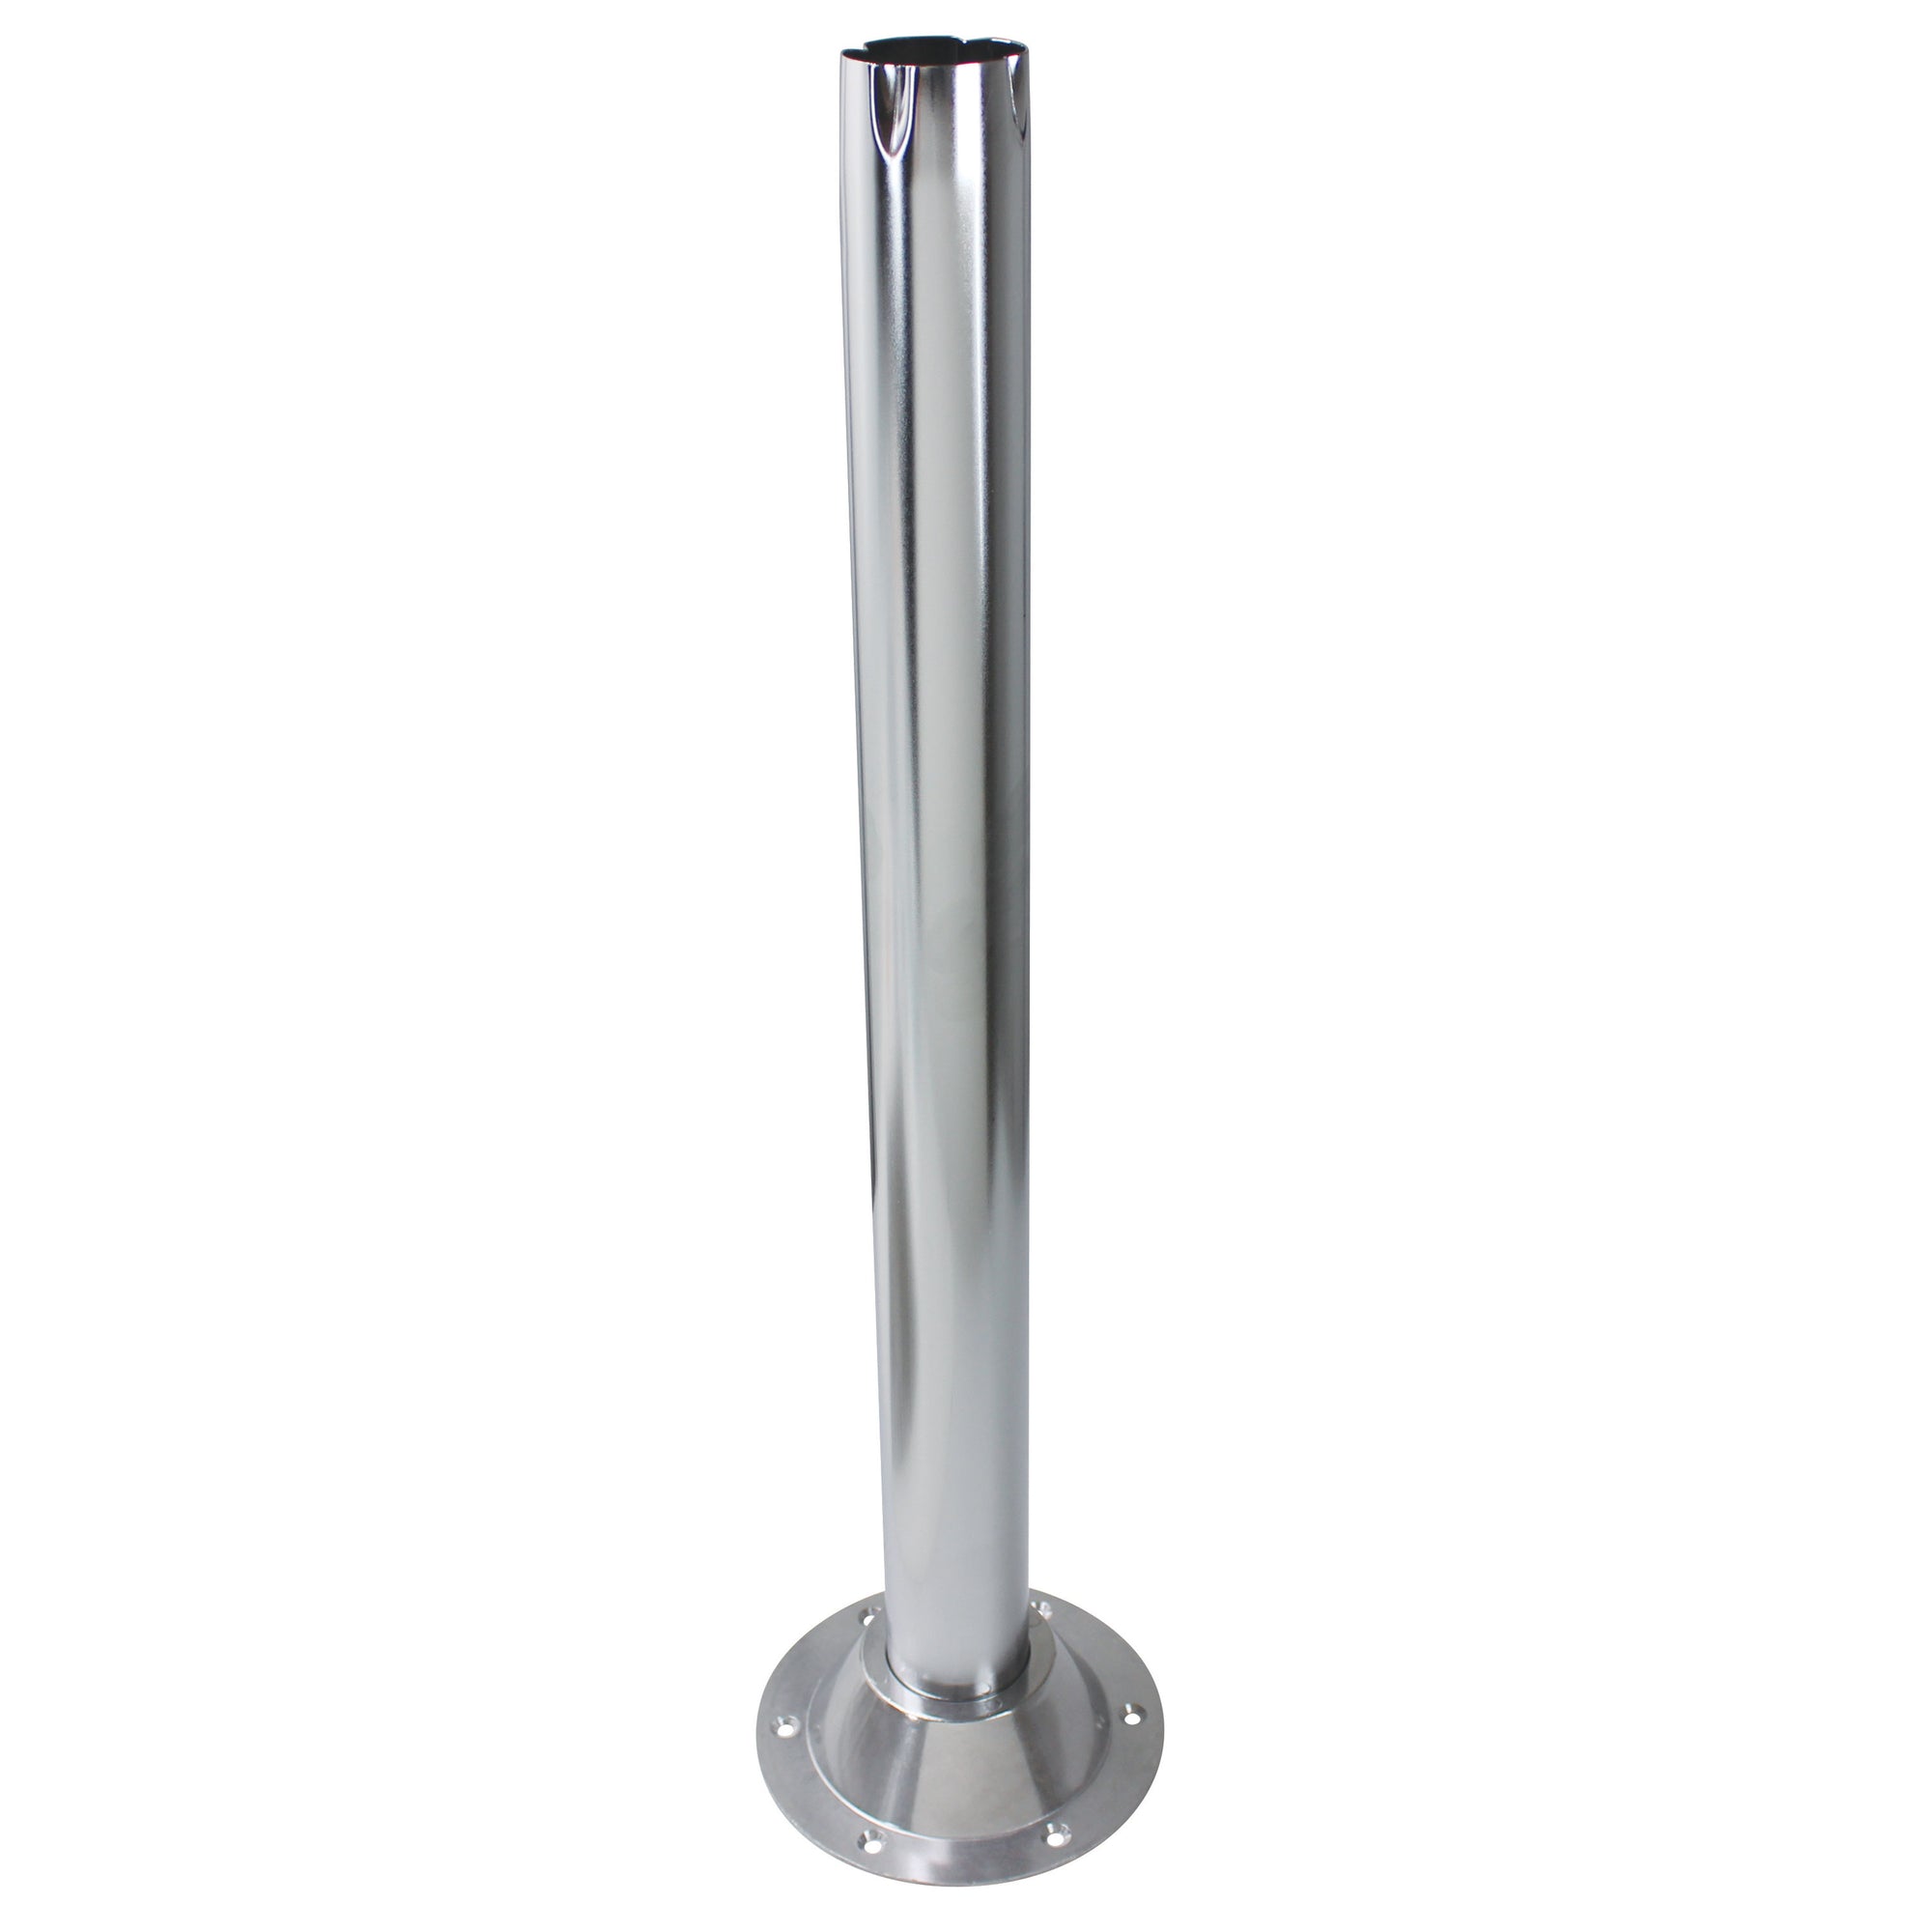 Russell Products MA-956 Chrome Pedestal Table Leg - 31-1/2"